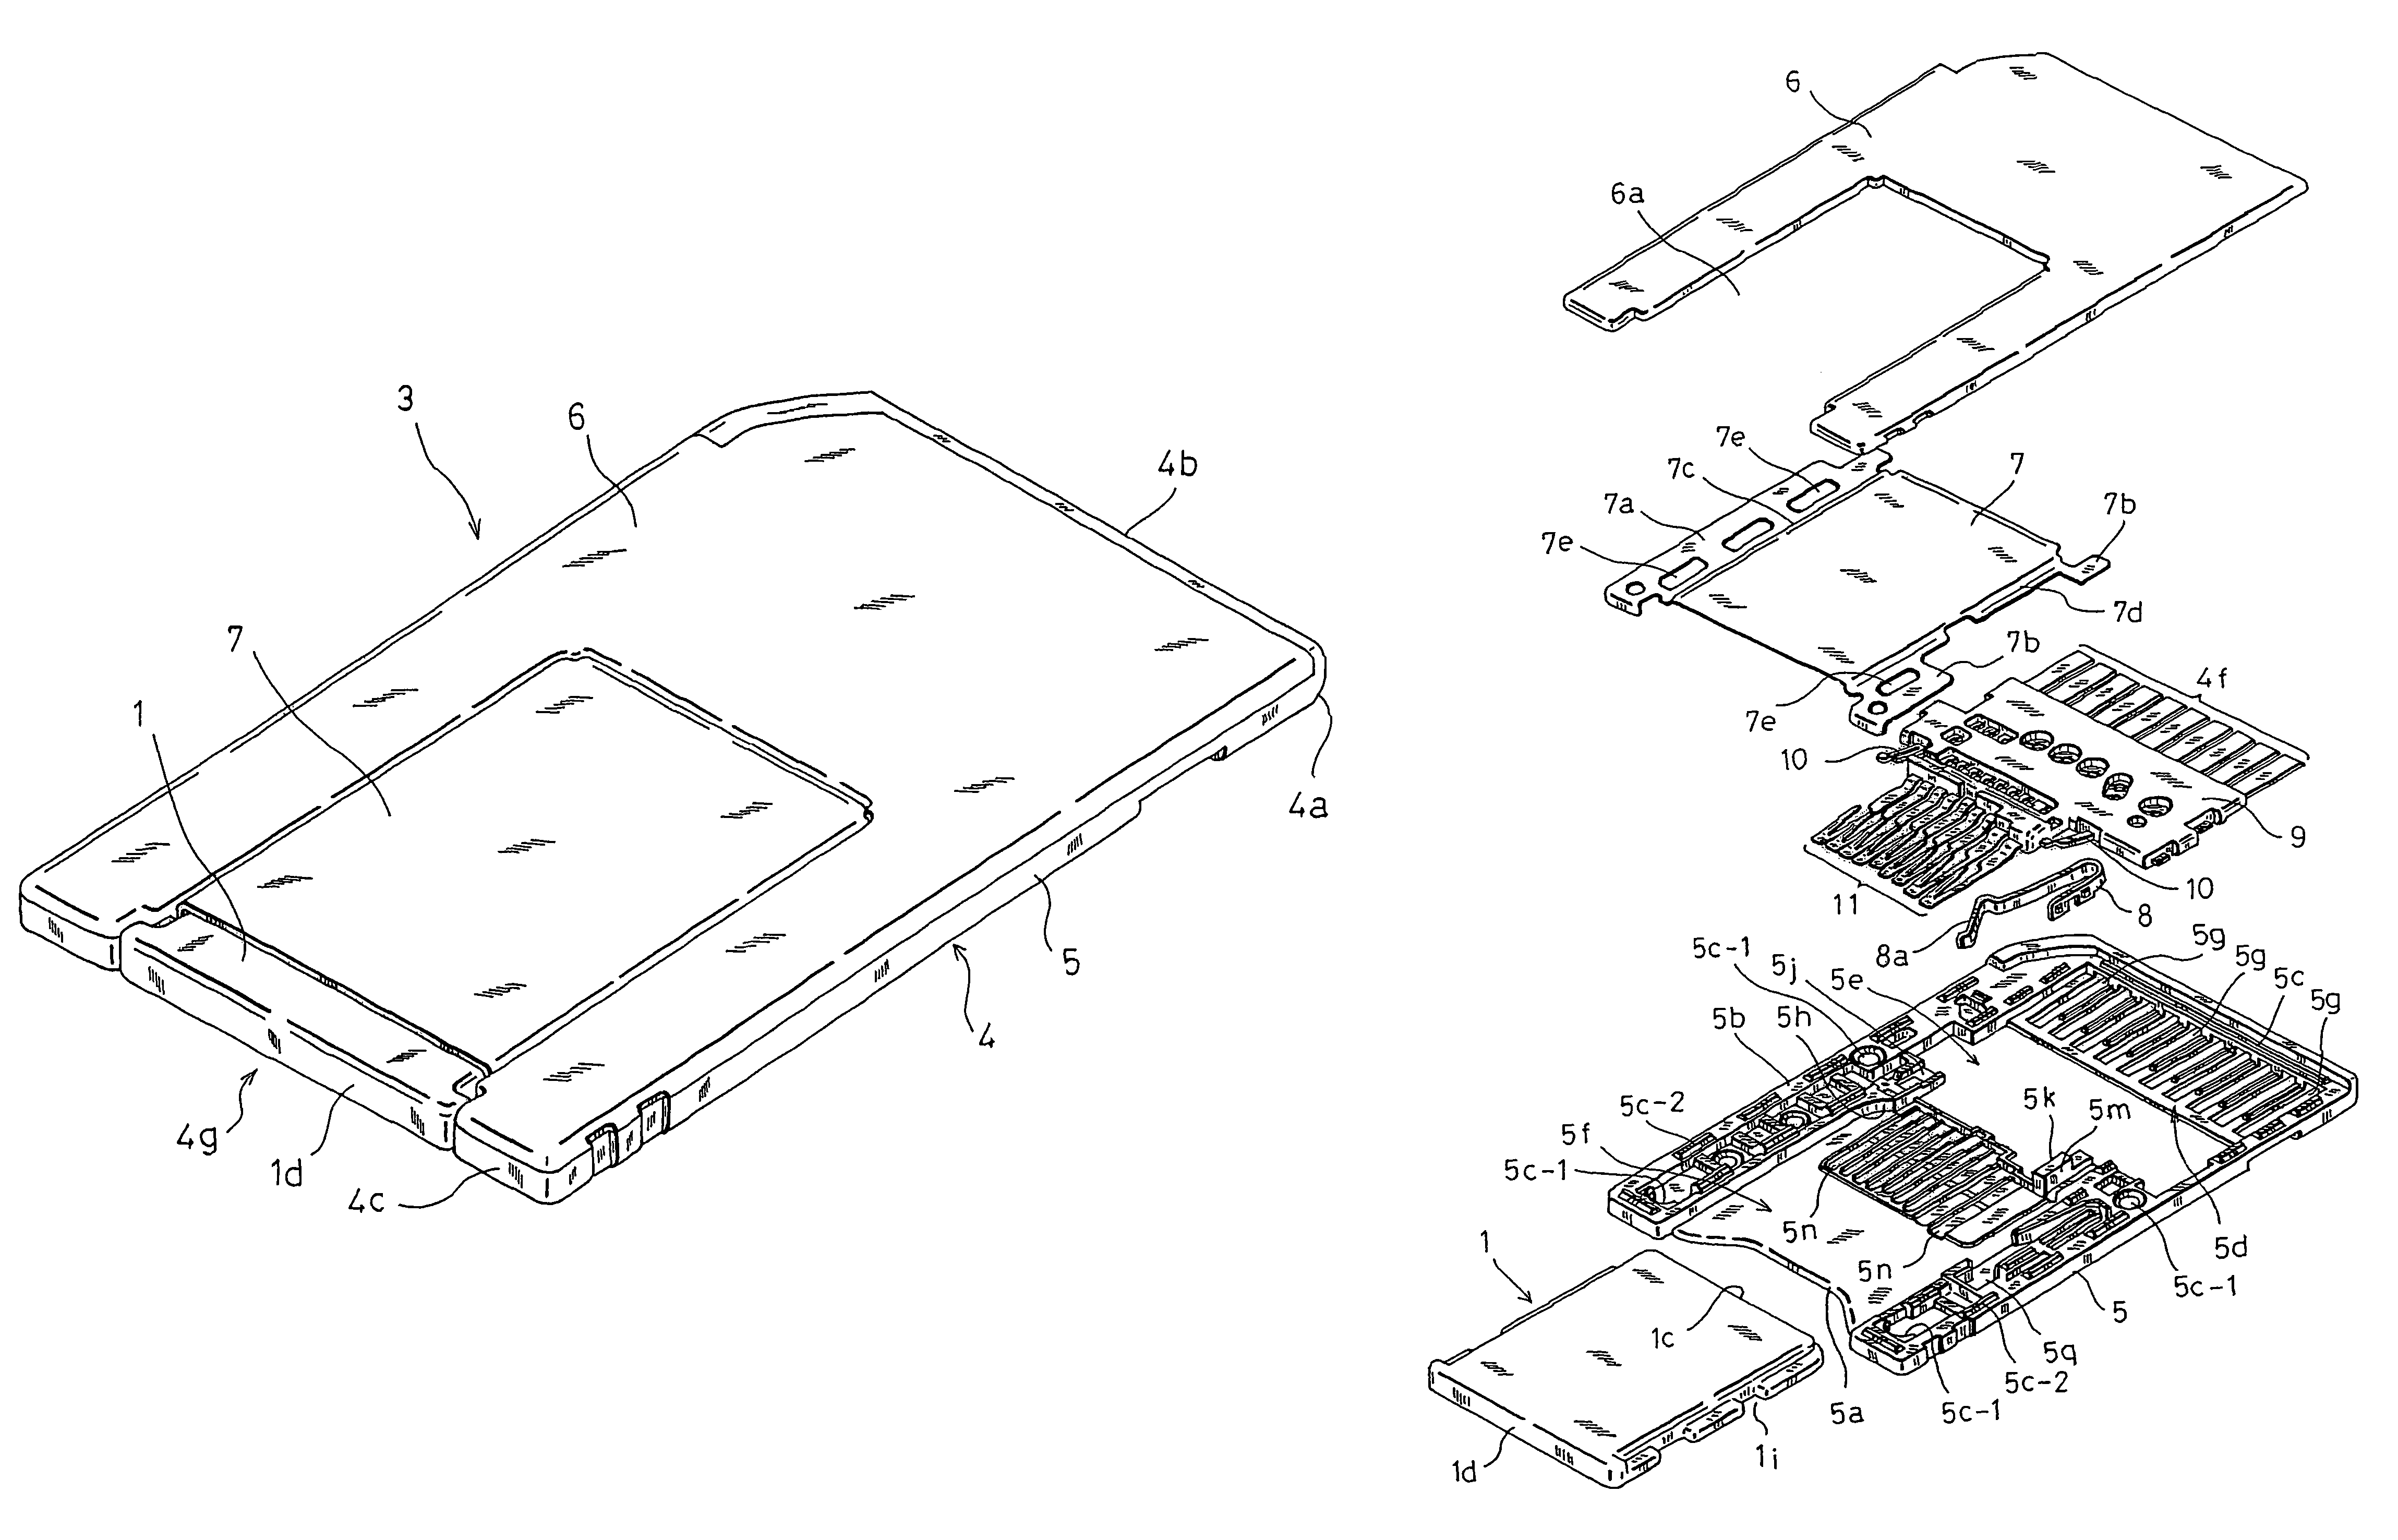 Contact, and card adaptor and card connector having the same